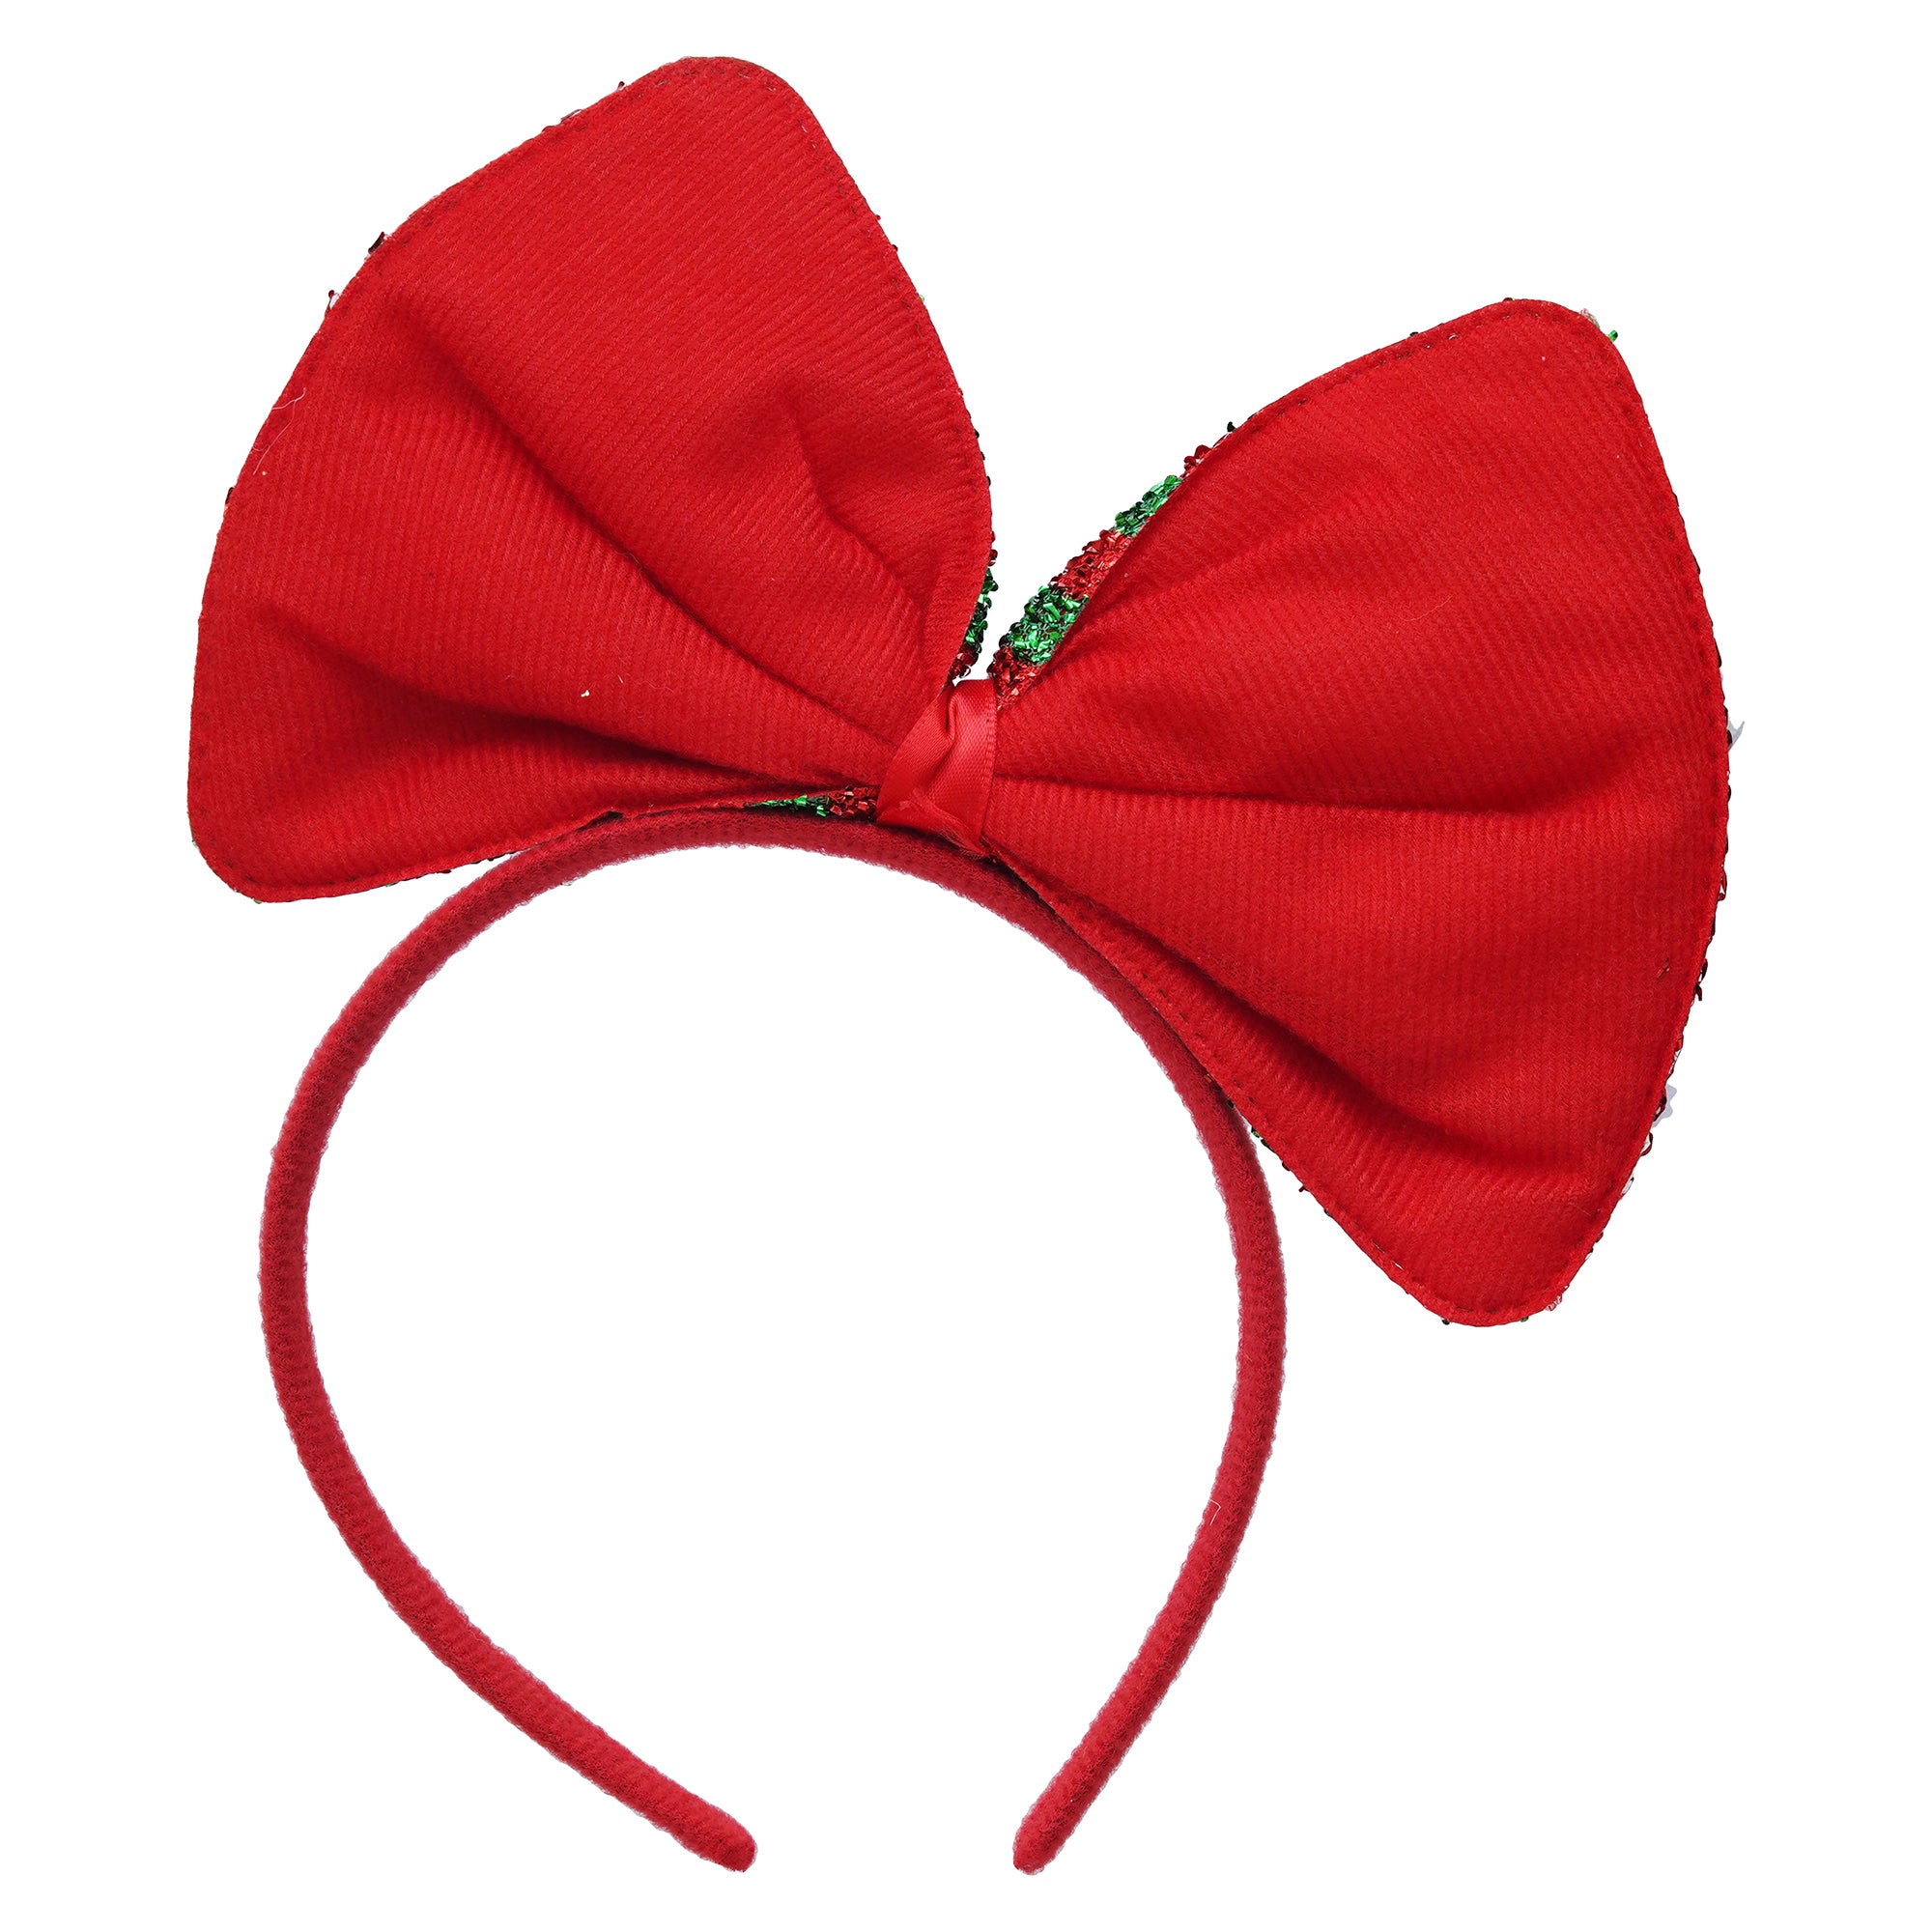 eCraftIndia Merry Christmas Themed Bow Headband with Snowflake Design  Hair Accessories Headwear For Christmas Party, Best Gift for Girls, Women 6